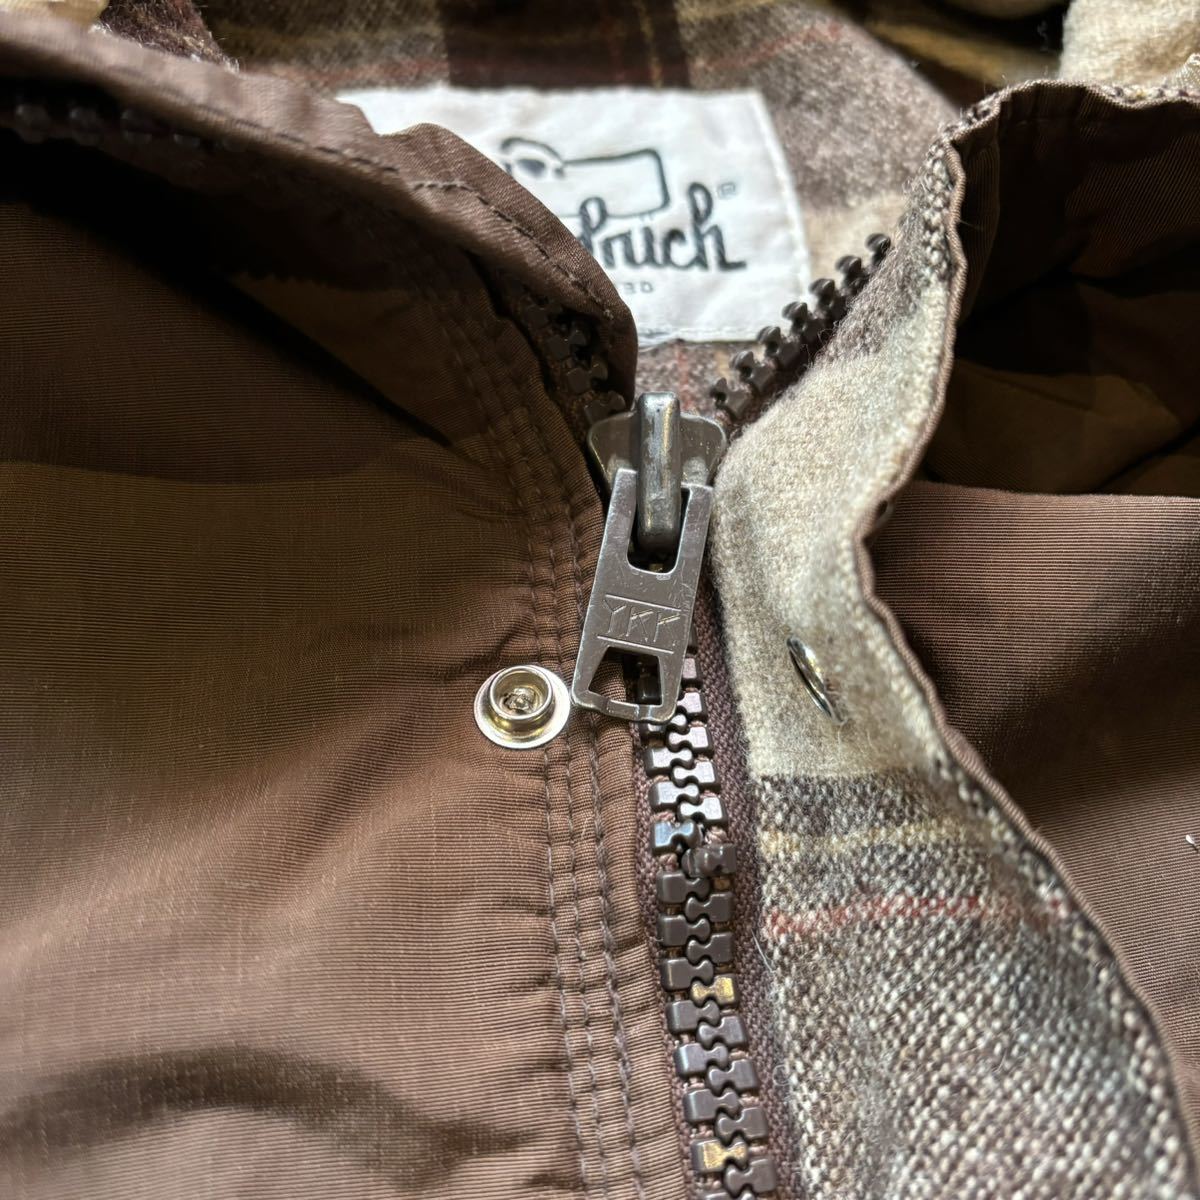 70s〜 Woolrich mountain parka “brown color” 70年代 ウールリッチ マウンテンパーカ 茶色_画像4